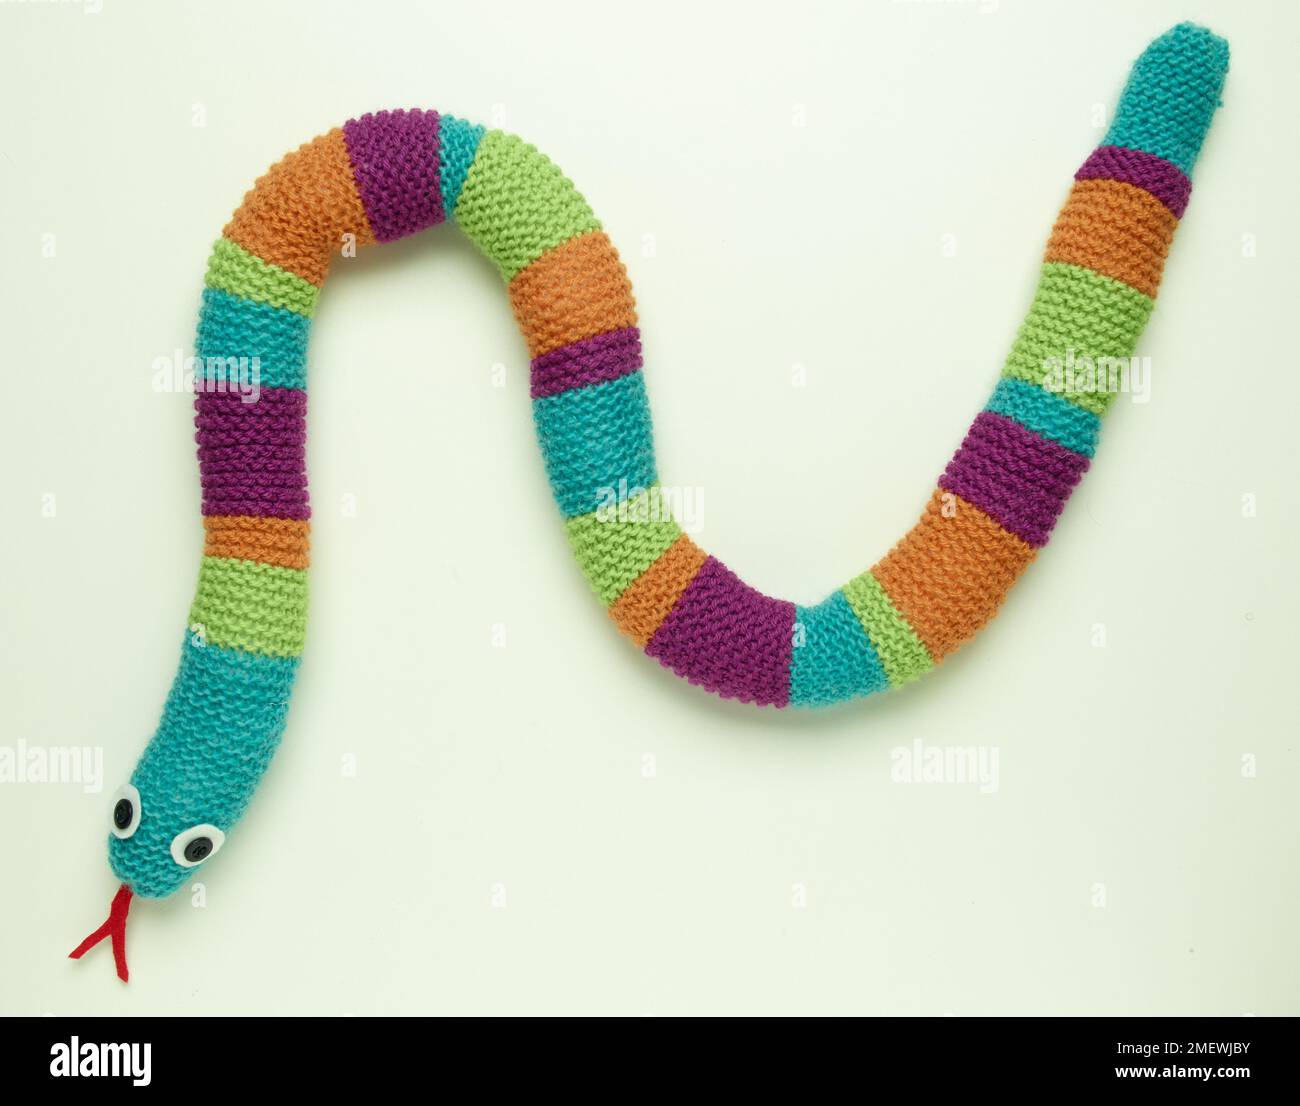 Knitted toy snakes Stock Photo